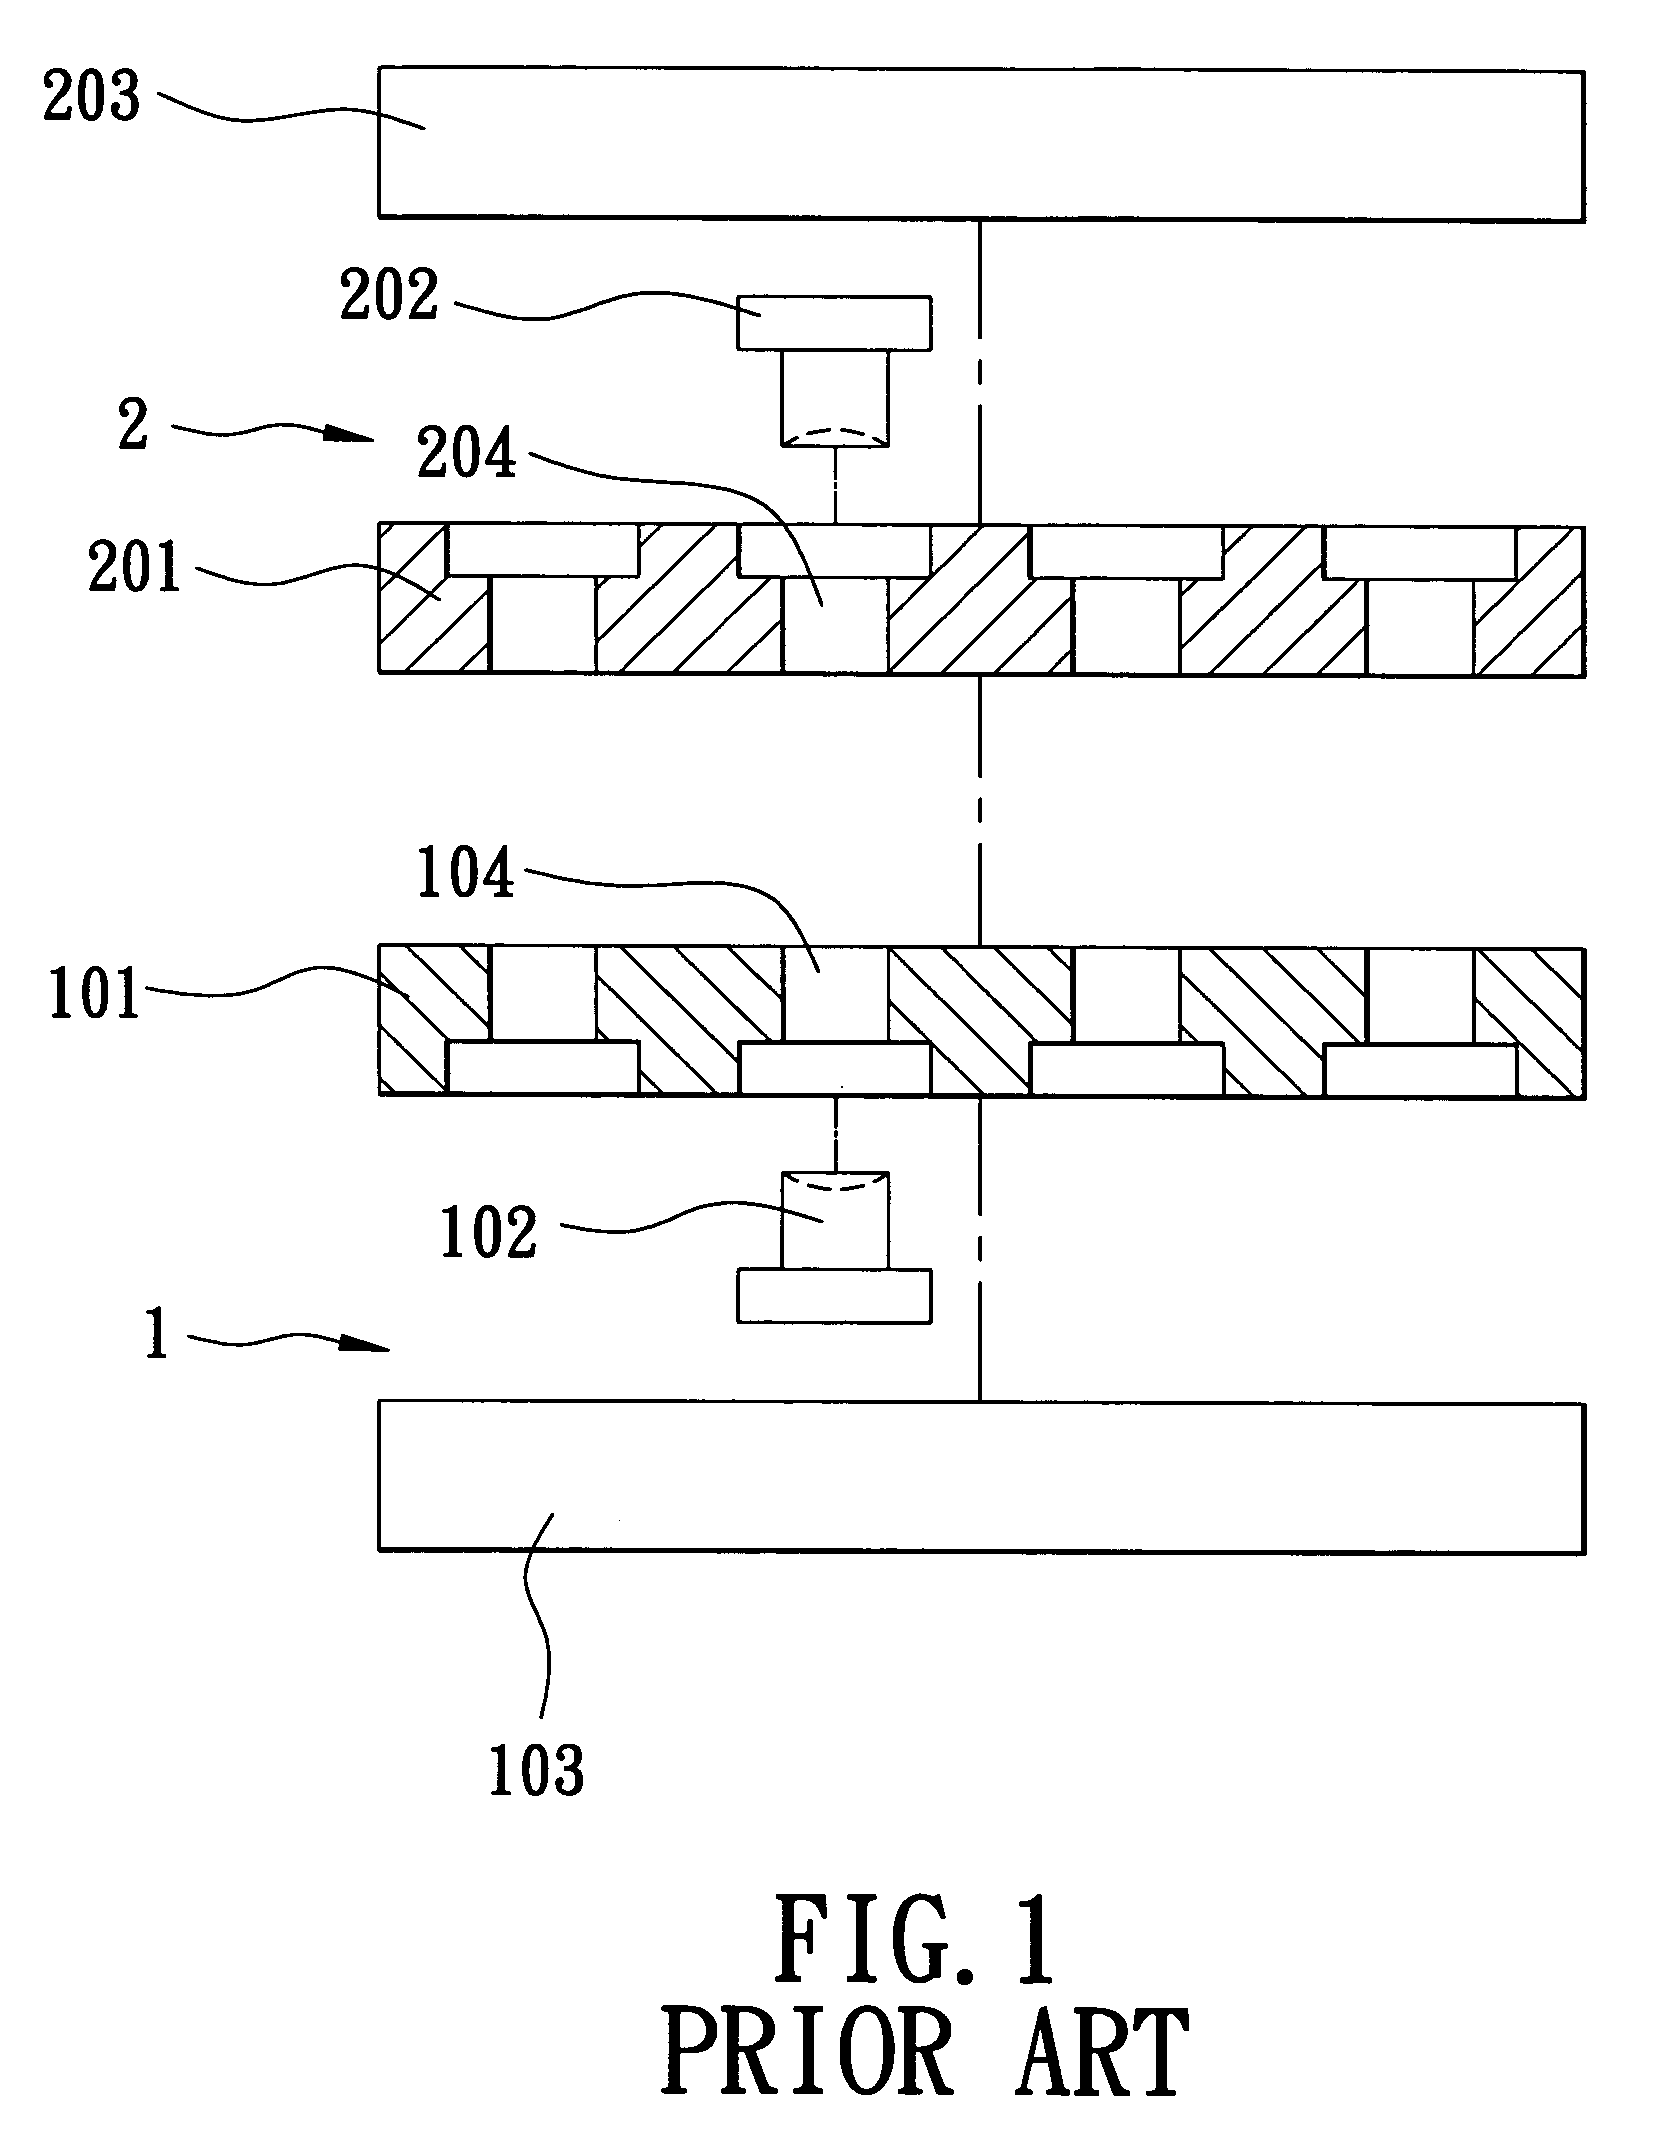 Molding apparatus with removable mold cores